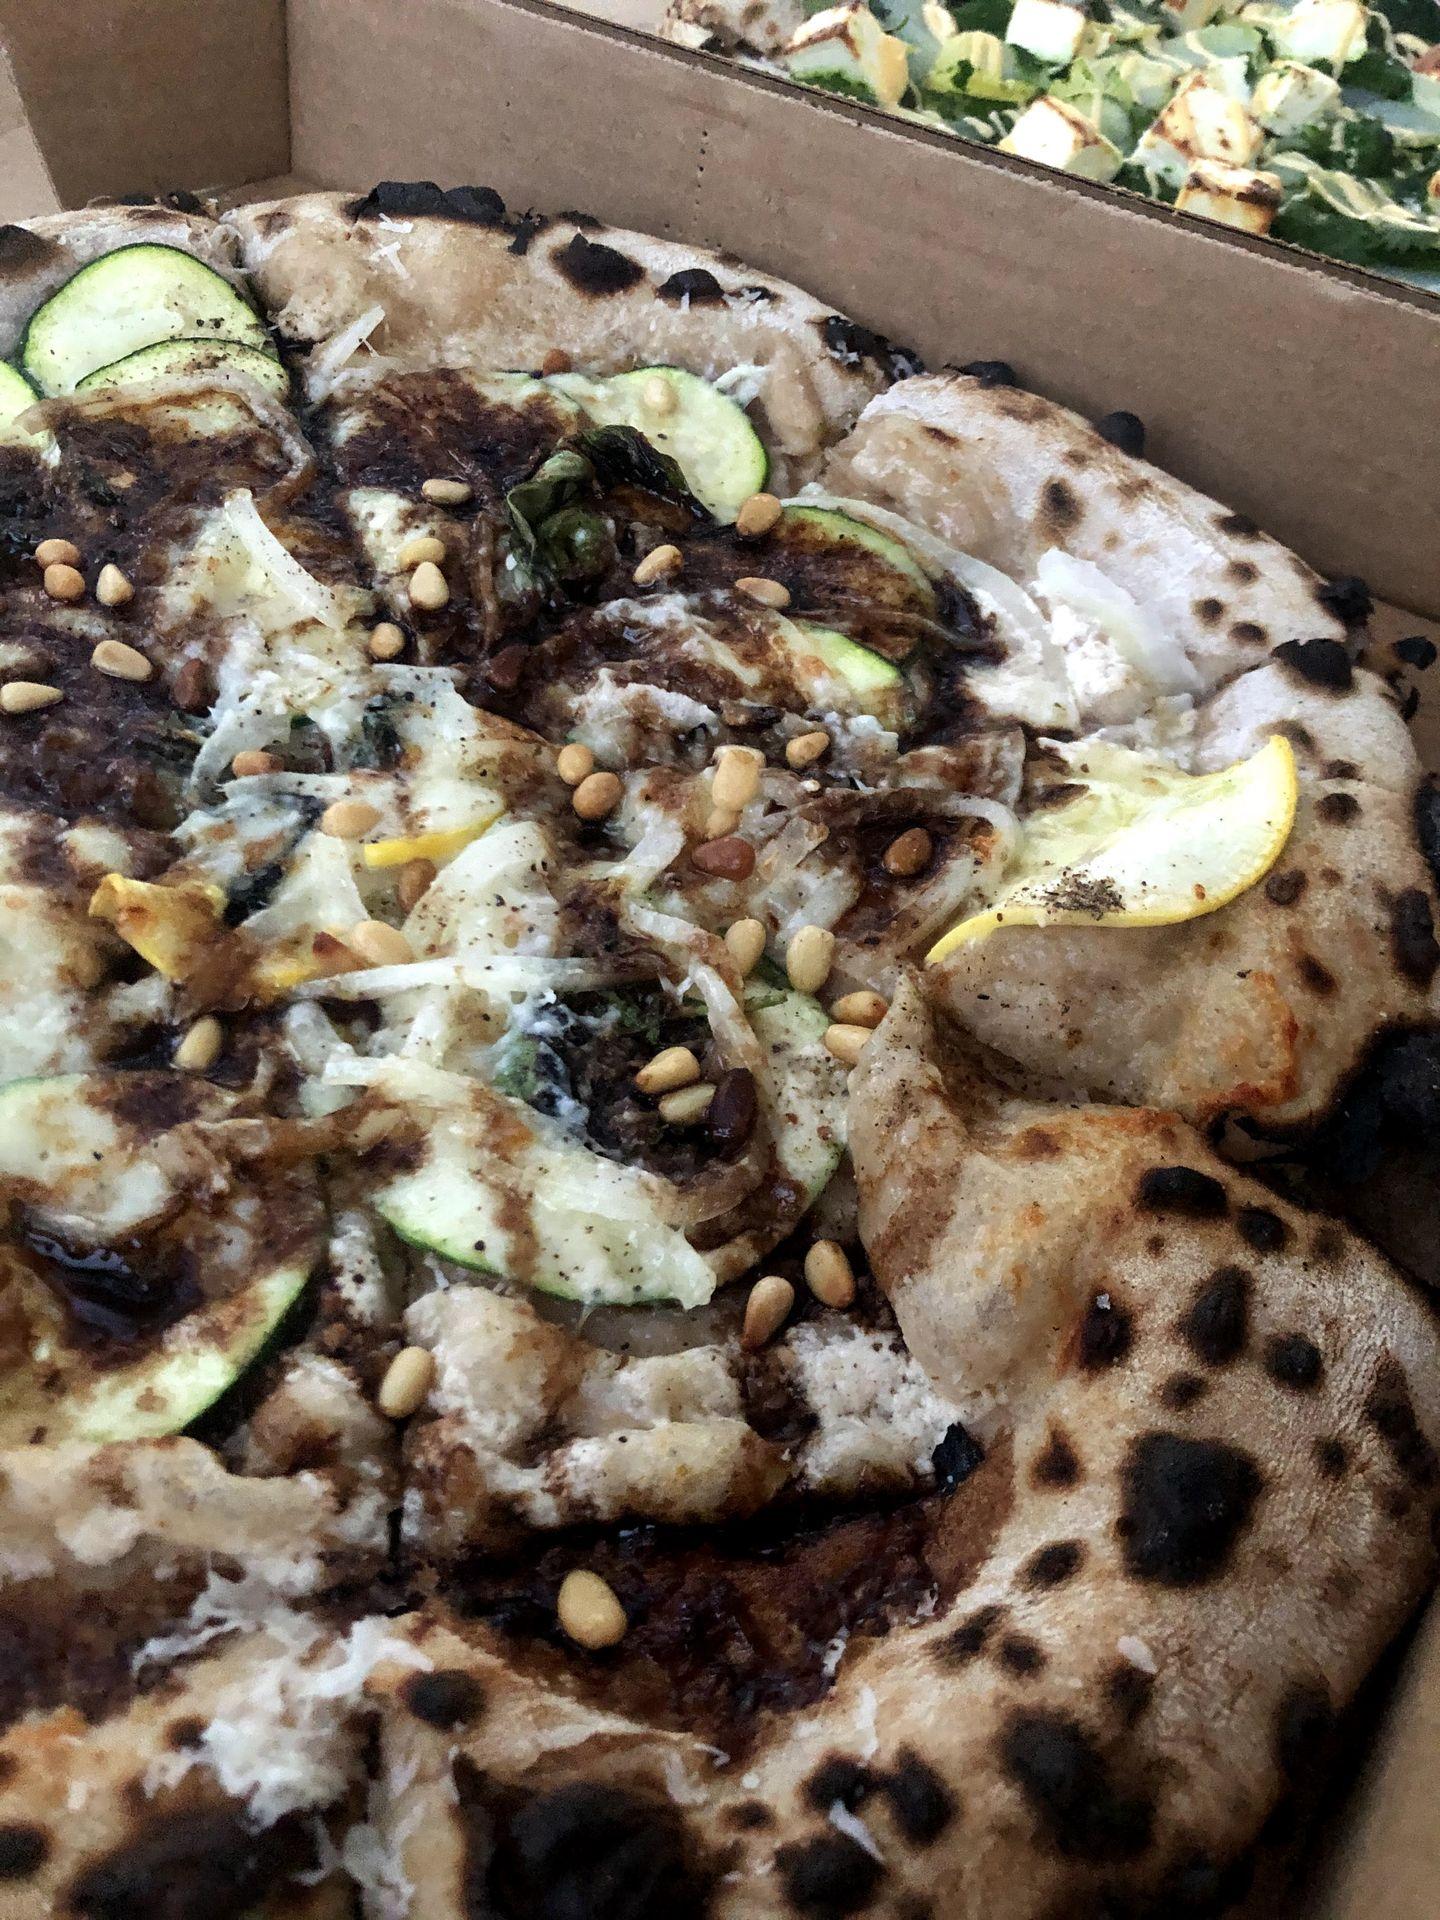 A pizza from Jester King Brewery